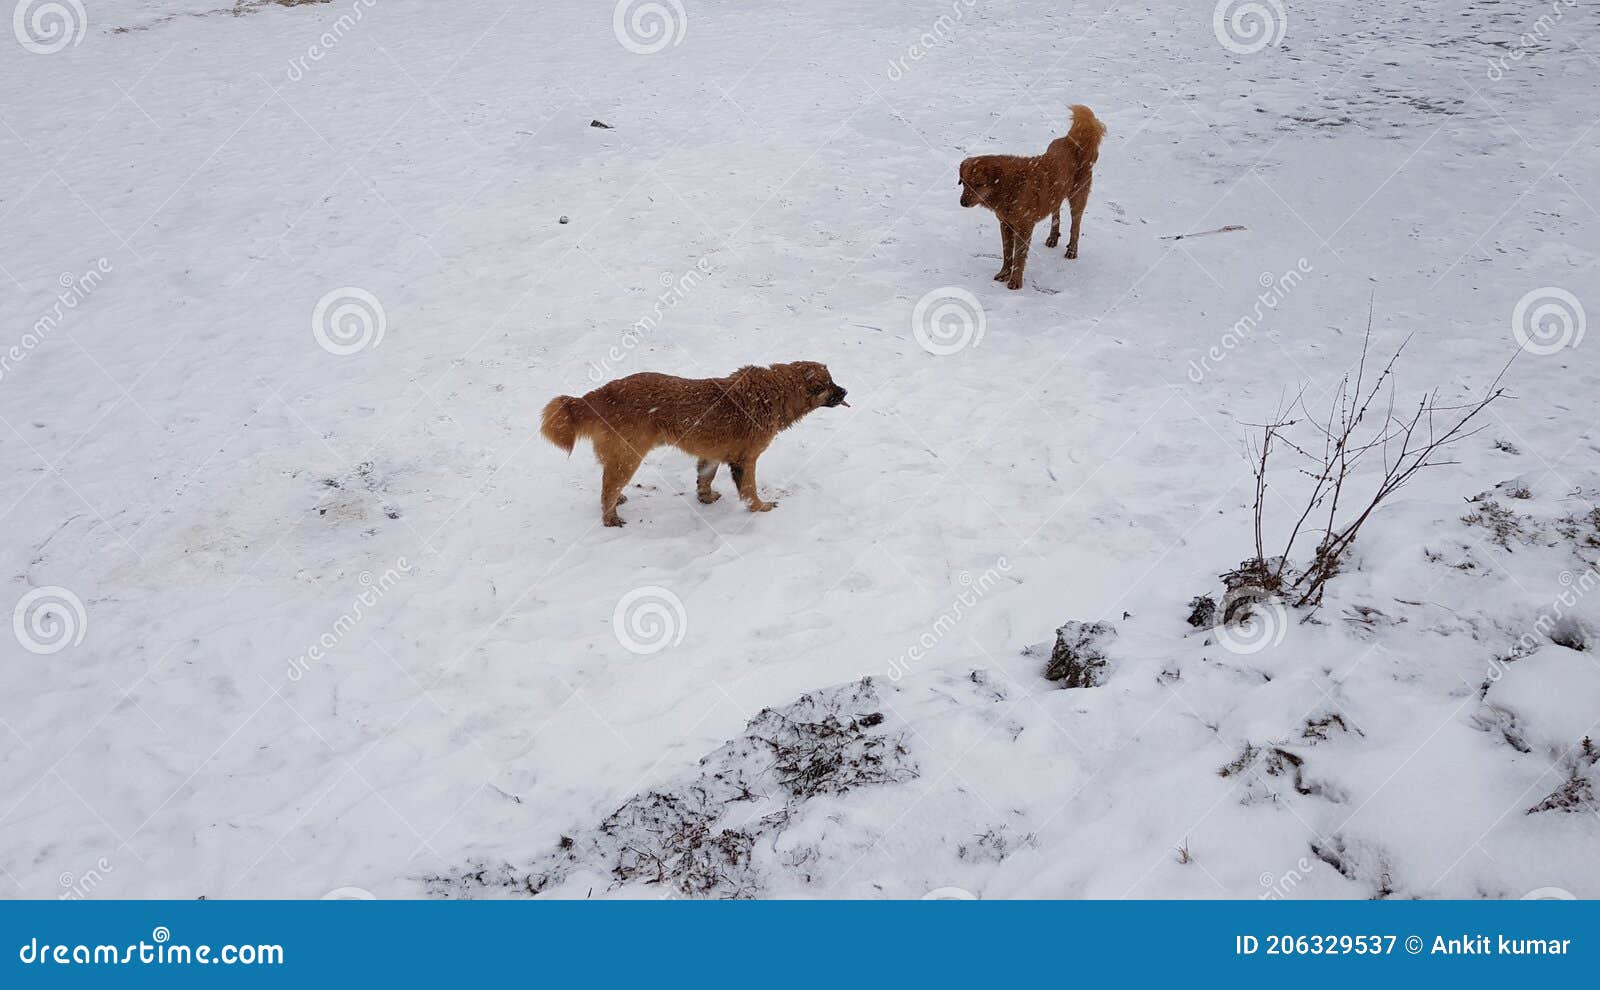 two brown dogs are playing on frozen lake juda ka tlab of mountain.